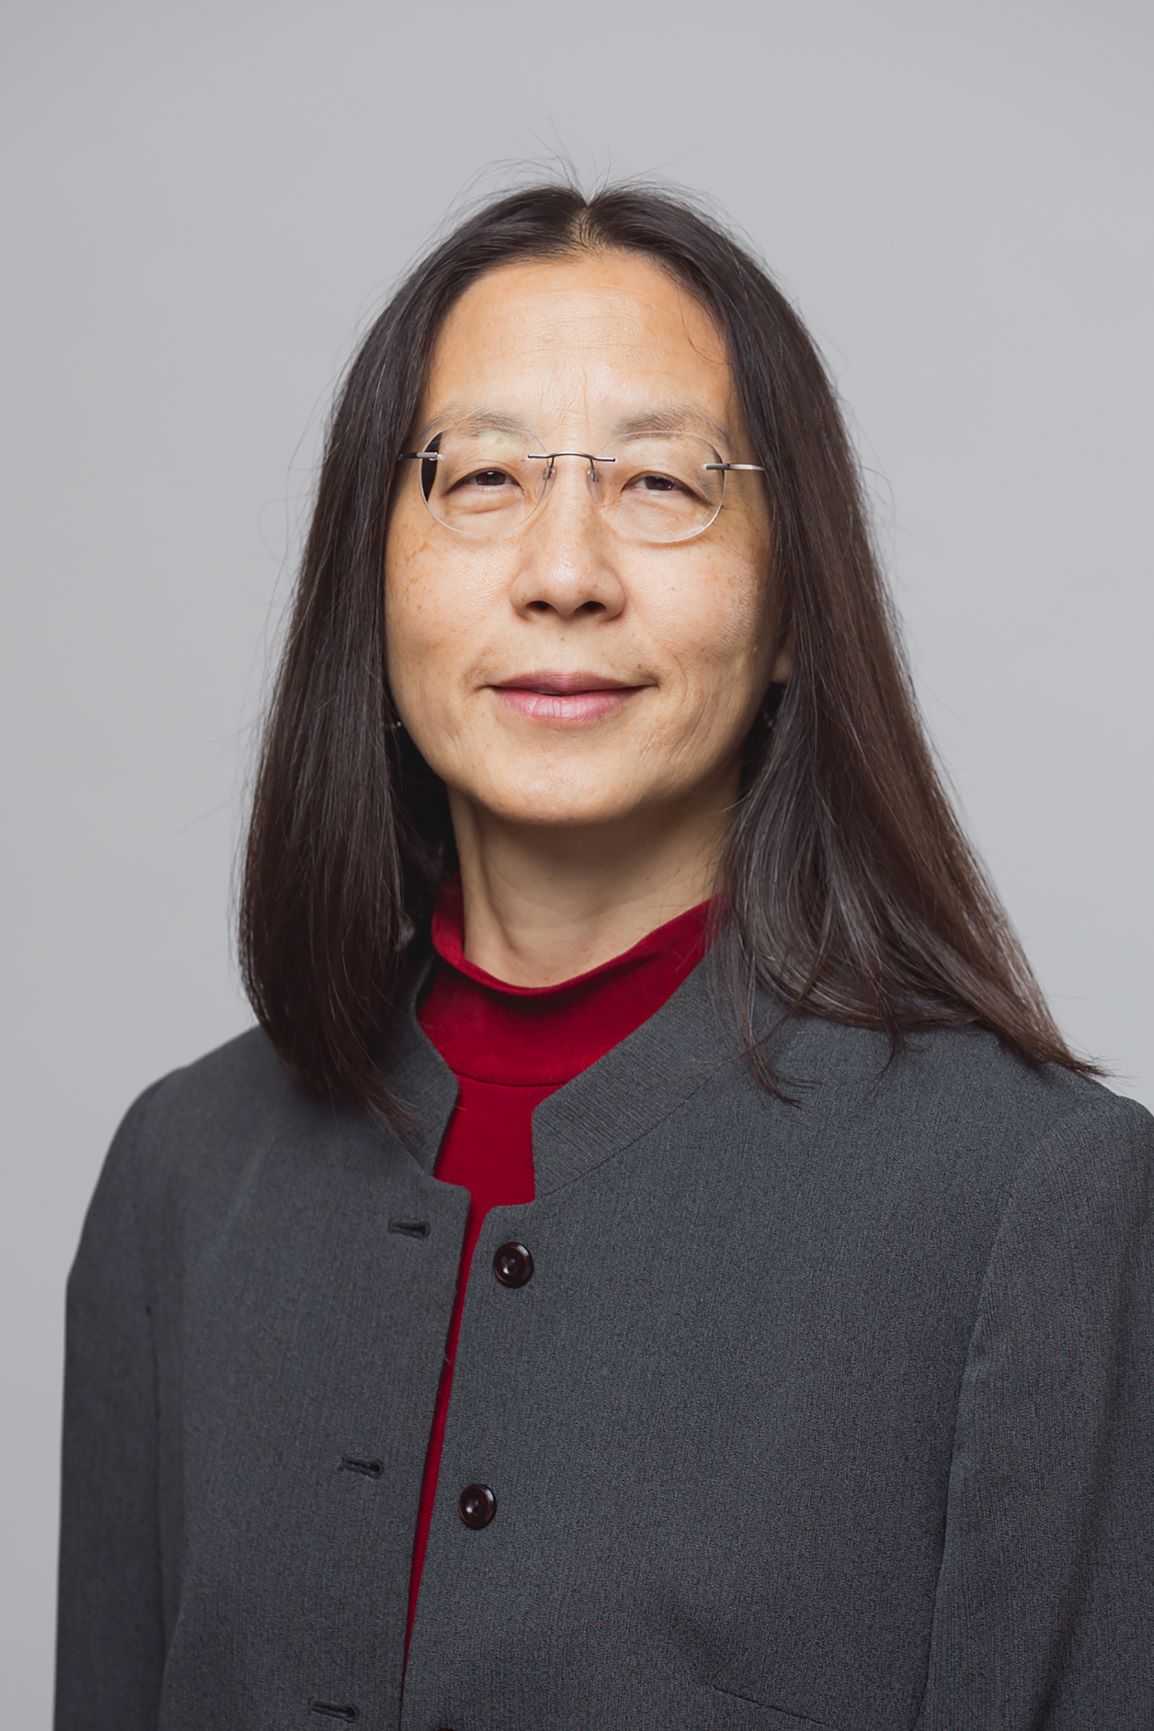 Asian woman with long, black hair, with rounded silver glasses, wearing a gray suit jacket and red shirt, smiling in front of a gray background.